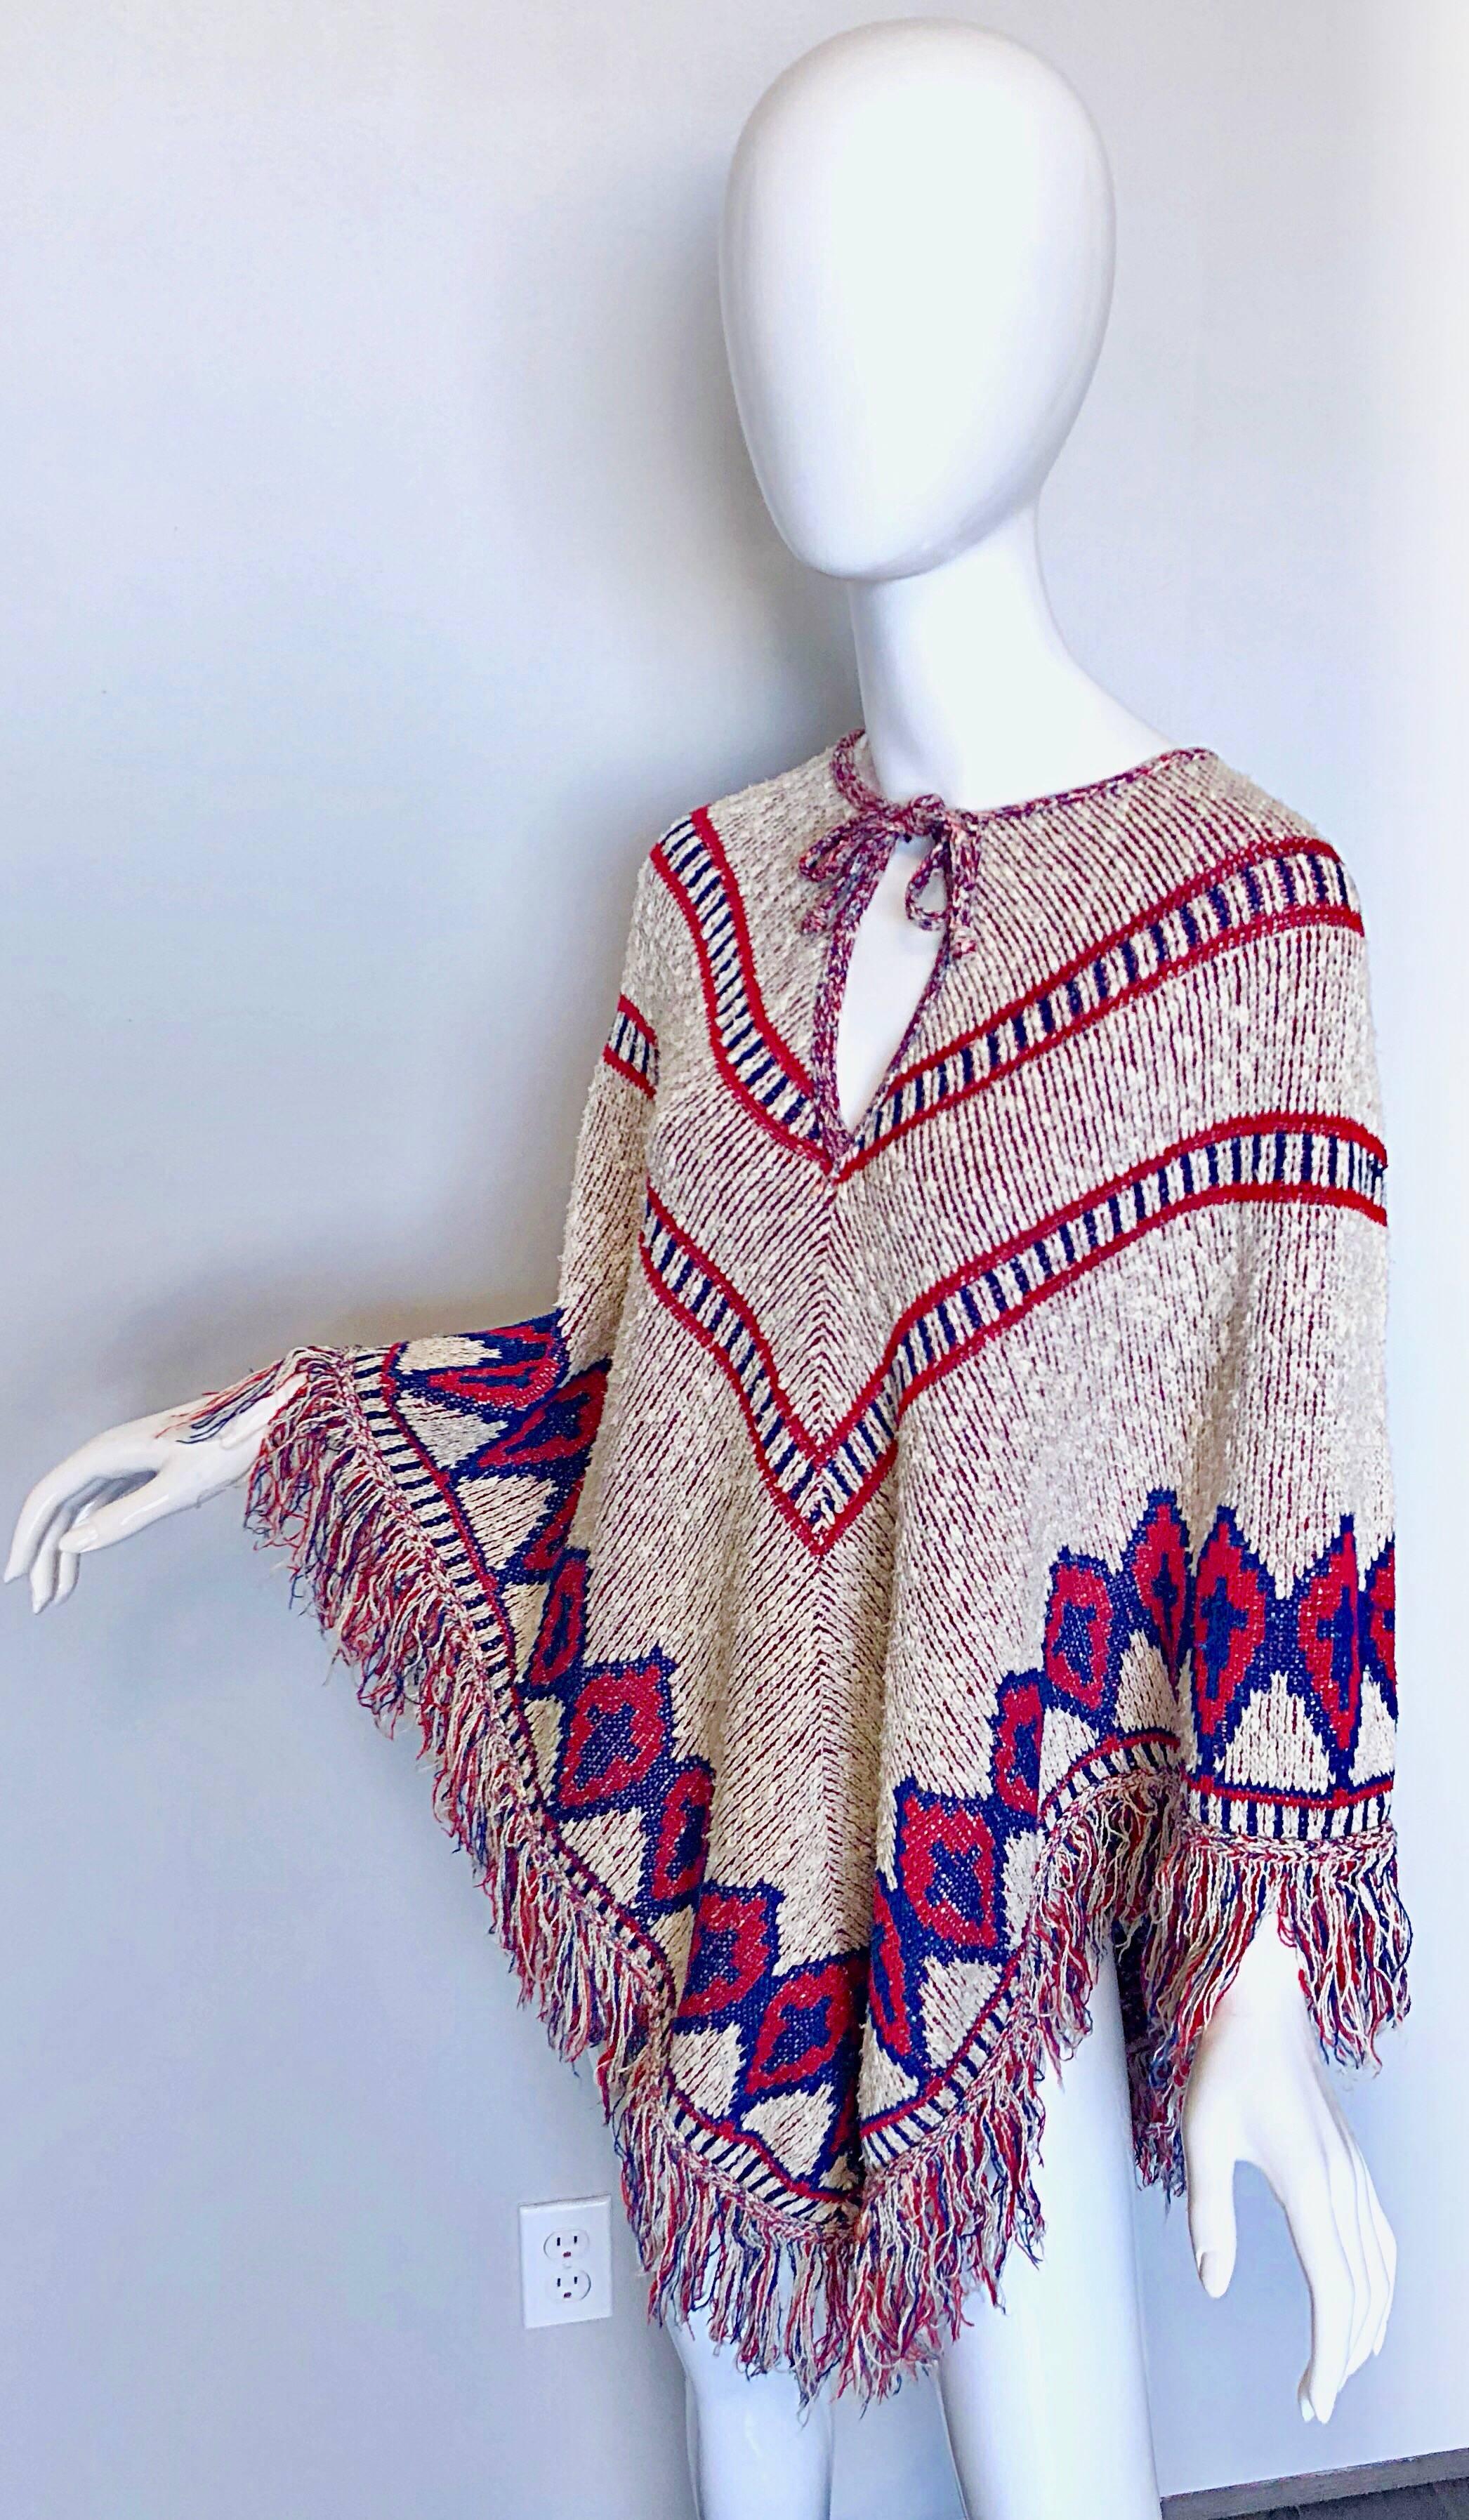 Women's Saks 5th Avenue 1970s Red, White and Blue Navajo Boho Vintage 70s Poncho Cape